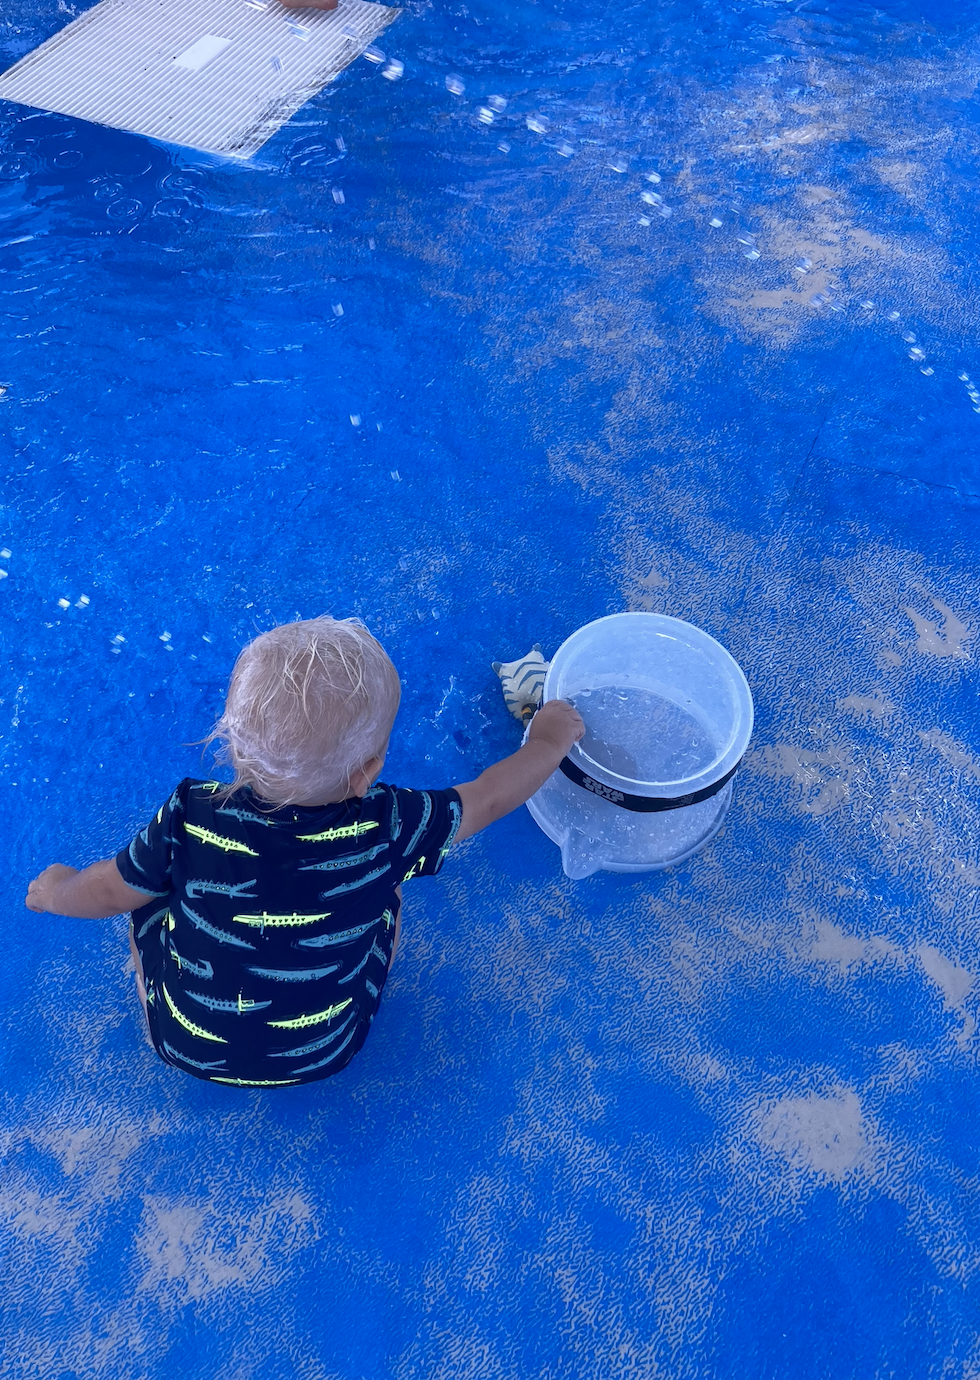 A toddler sits on the ground, wearing a printed shirt, reaching towards a clear bucket of water on a blue textured surface